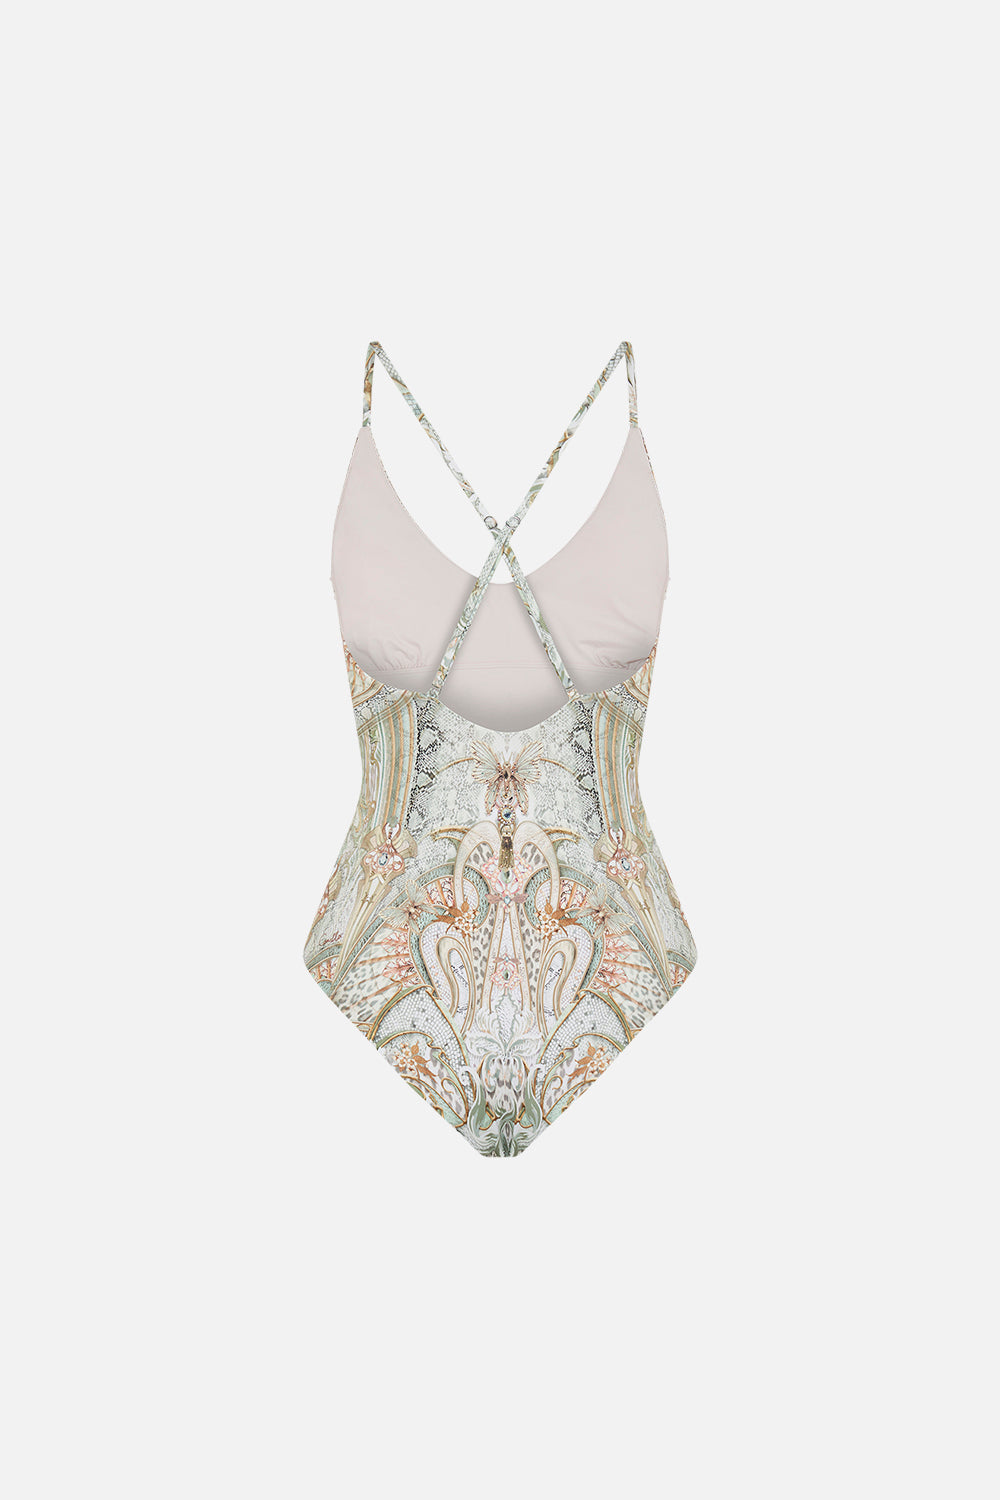 CAMILLA resortwear onepiece swimsuit in Ivory Tower Tales  print